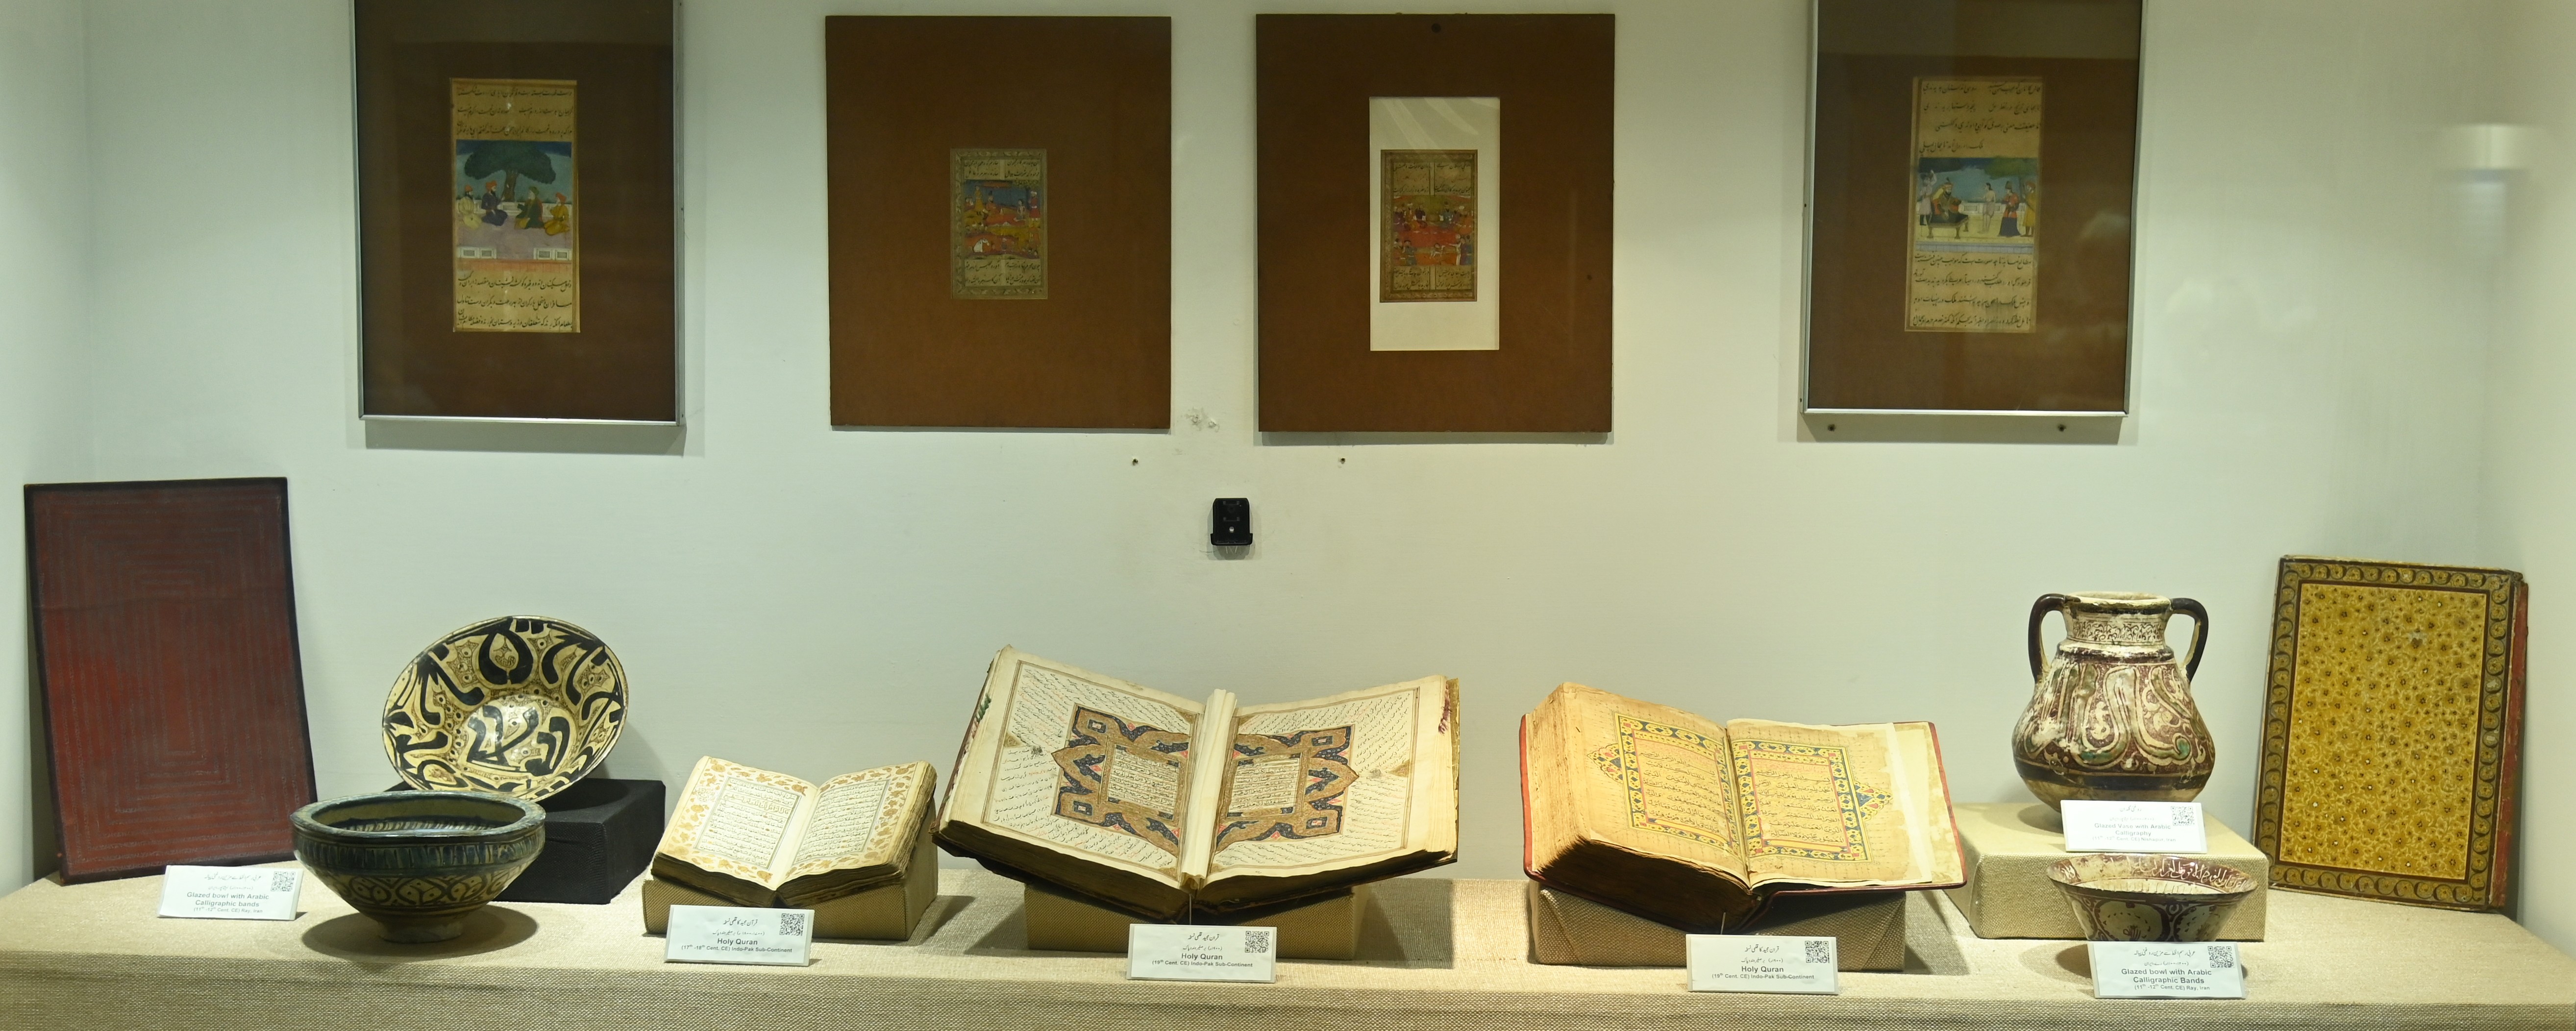 The collection of Rare Quran Manuscripts and Glazed Bowls with Arabic Calligraphic Bands